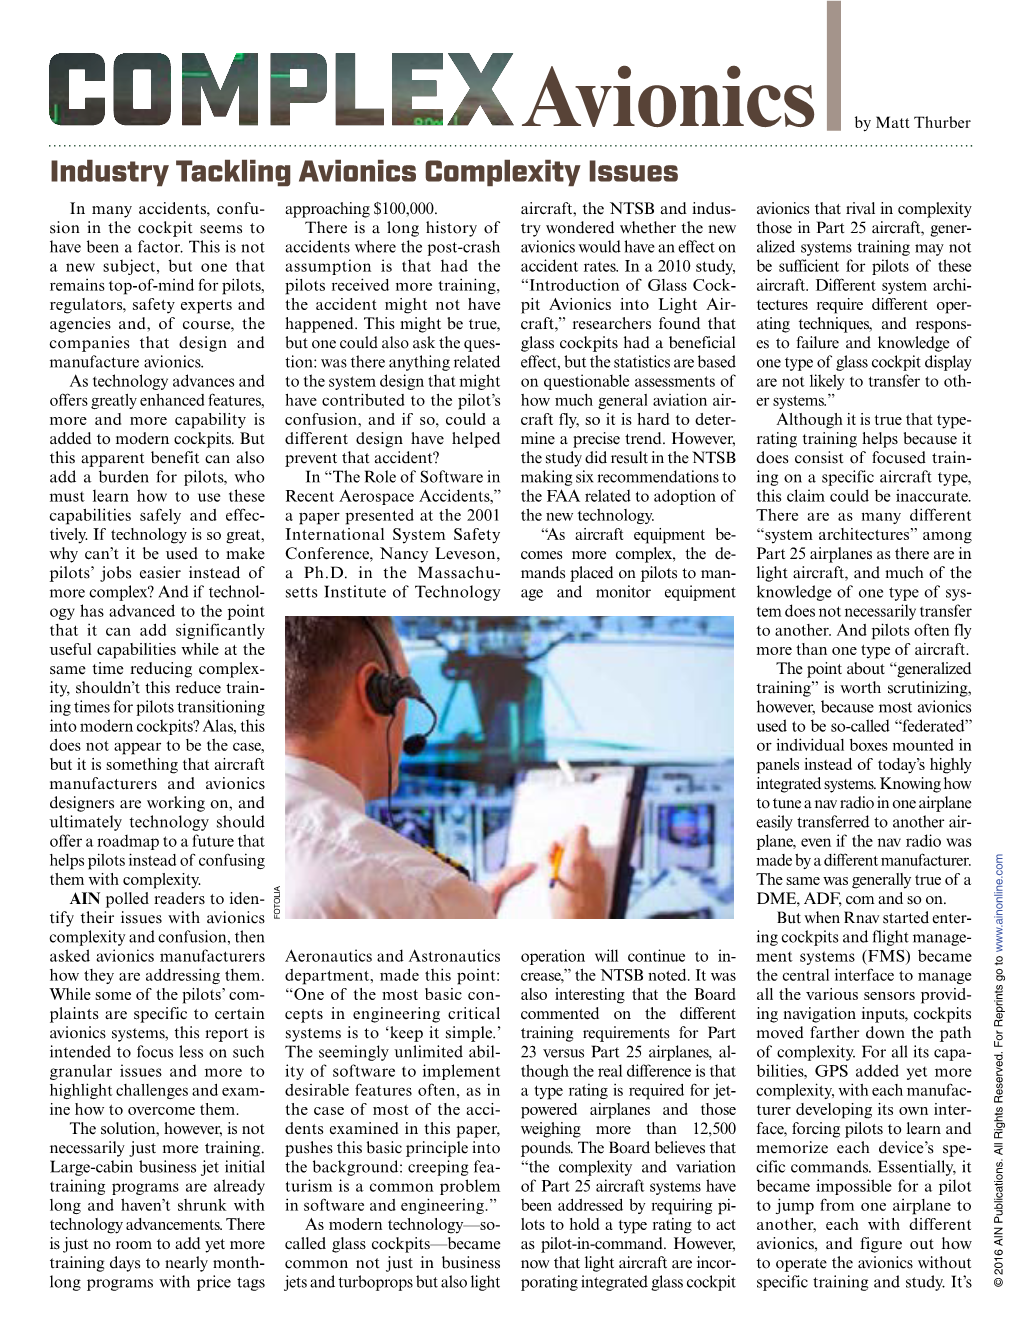 Industry Tackling Avionics Complexity Issues AIN Polledreaders Toiden - As Technology Advances and in Many Accidents, Confu the Solution,However, Isnot - - -